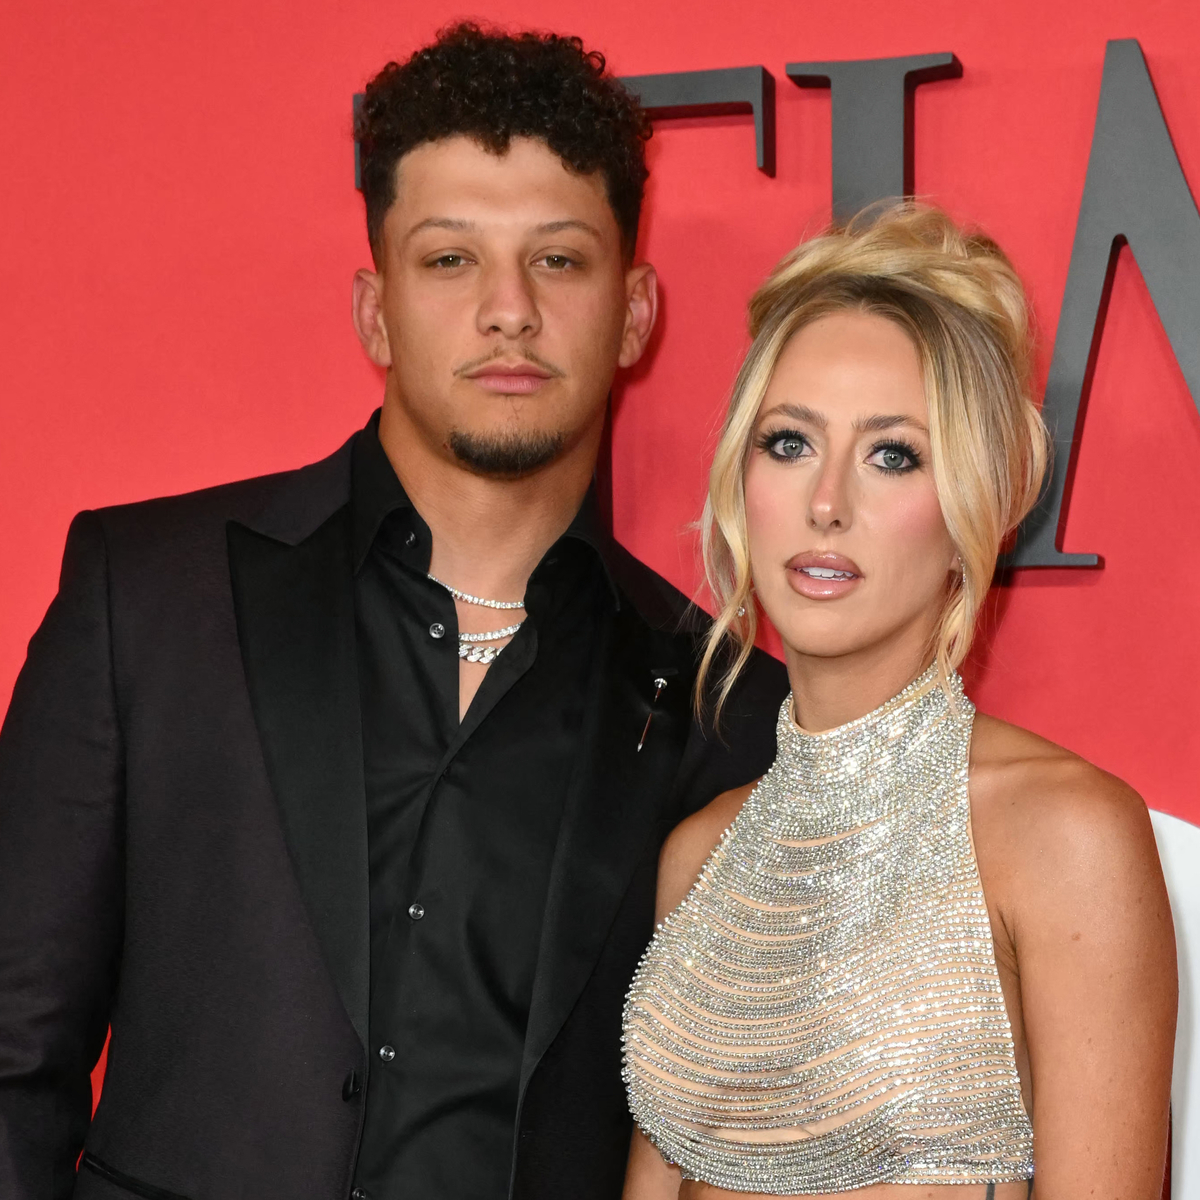 Brittany Mahomes and Patrick Mahomes’ Red Carpet Date Night Scores Them Major Points